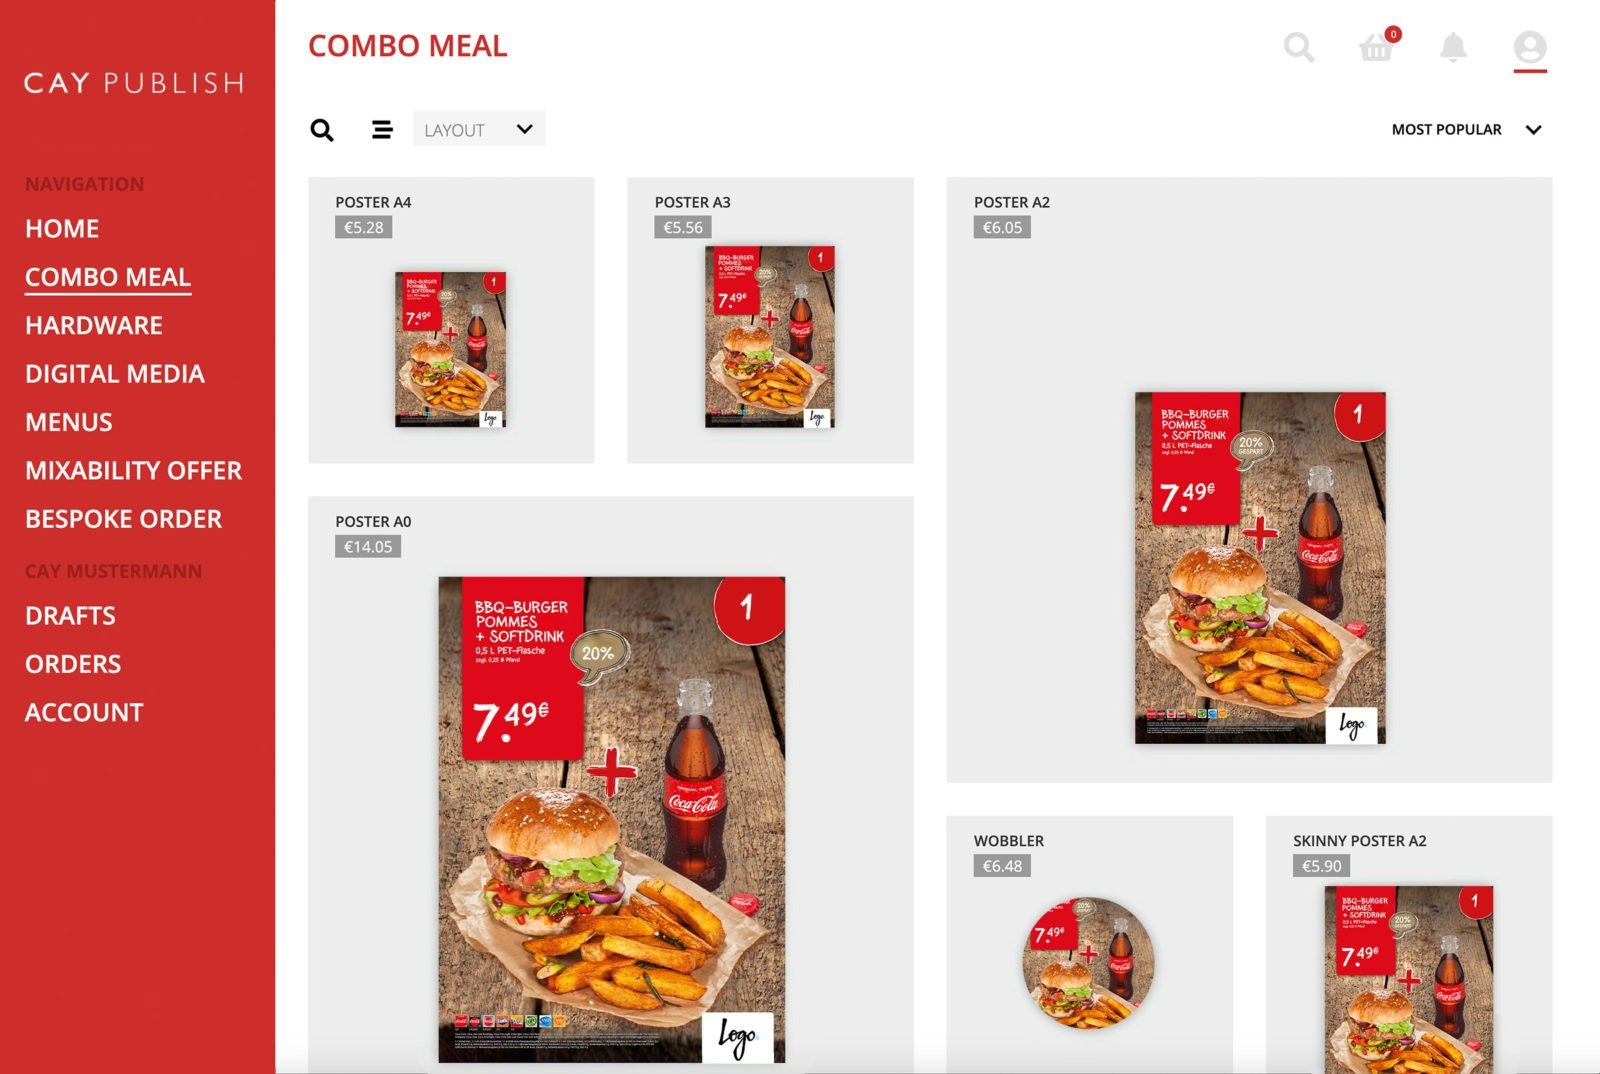 Combo Meal Selection in CAY PUBLISH